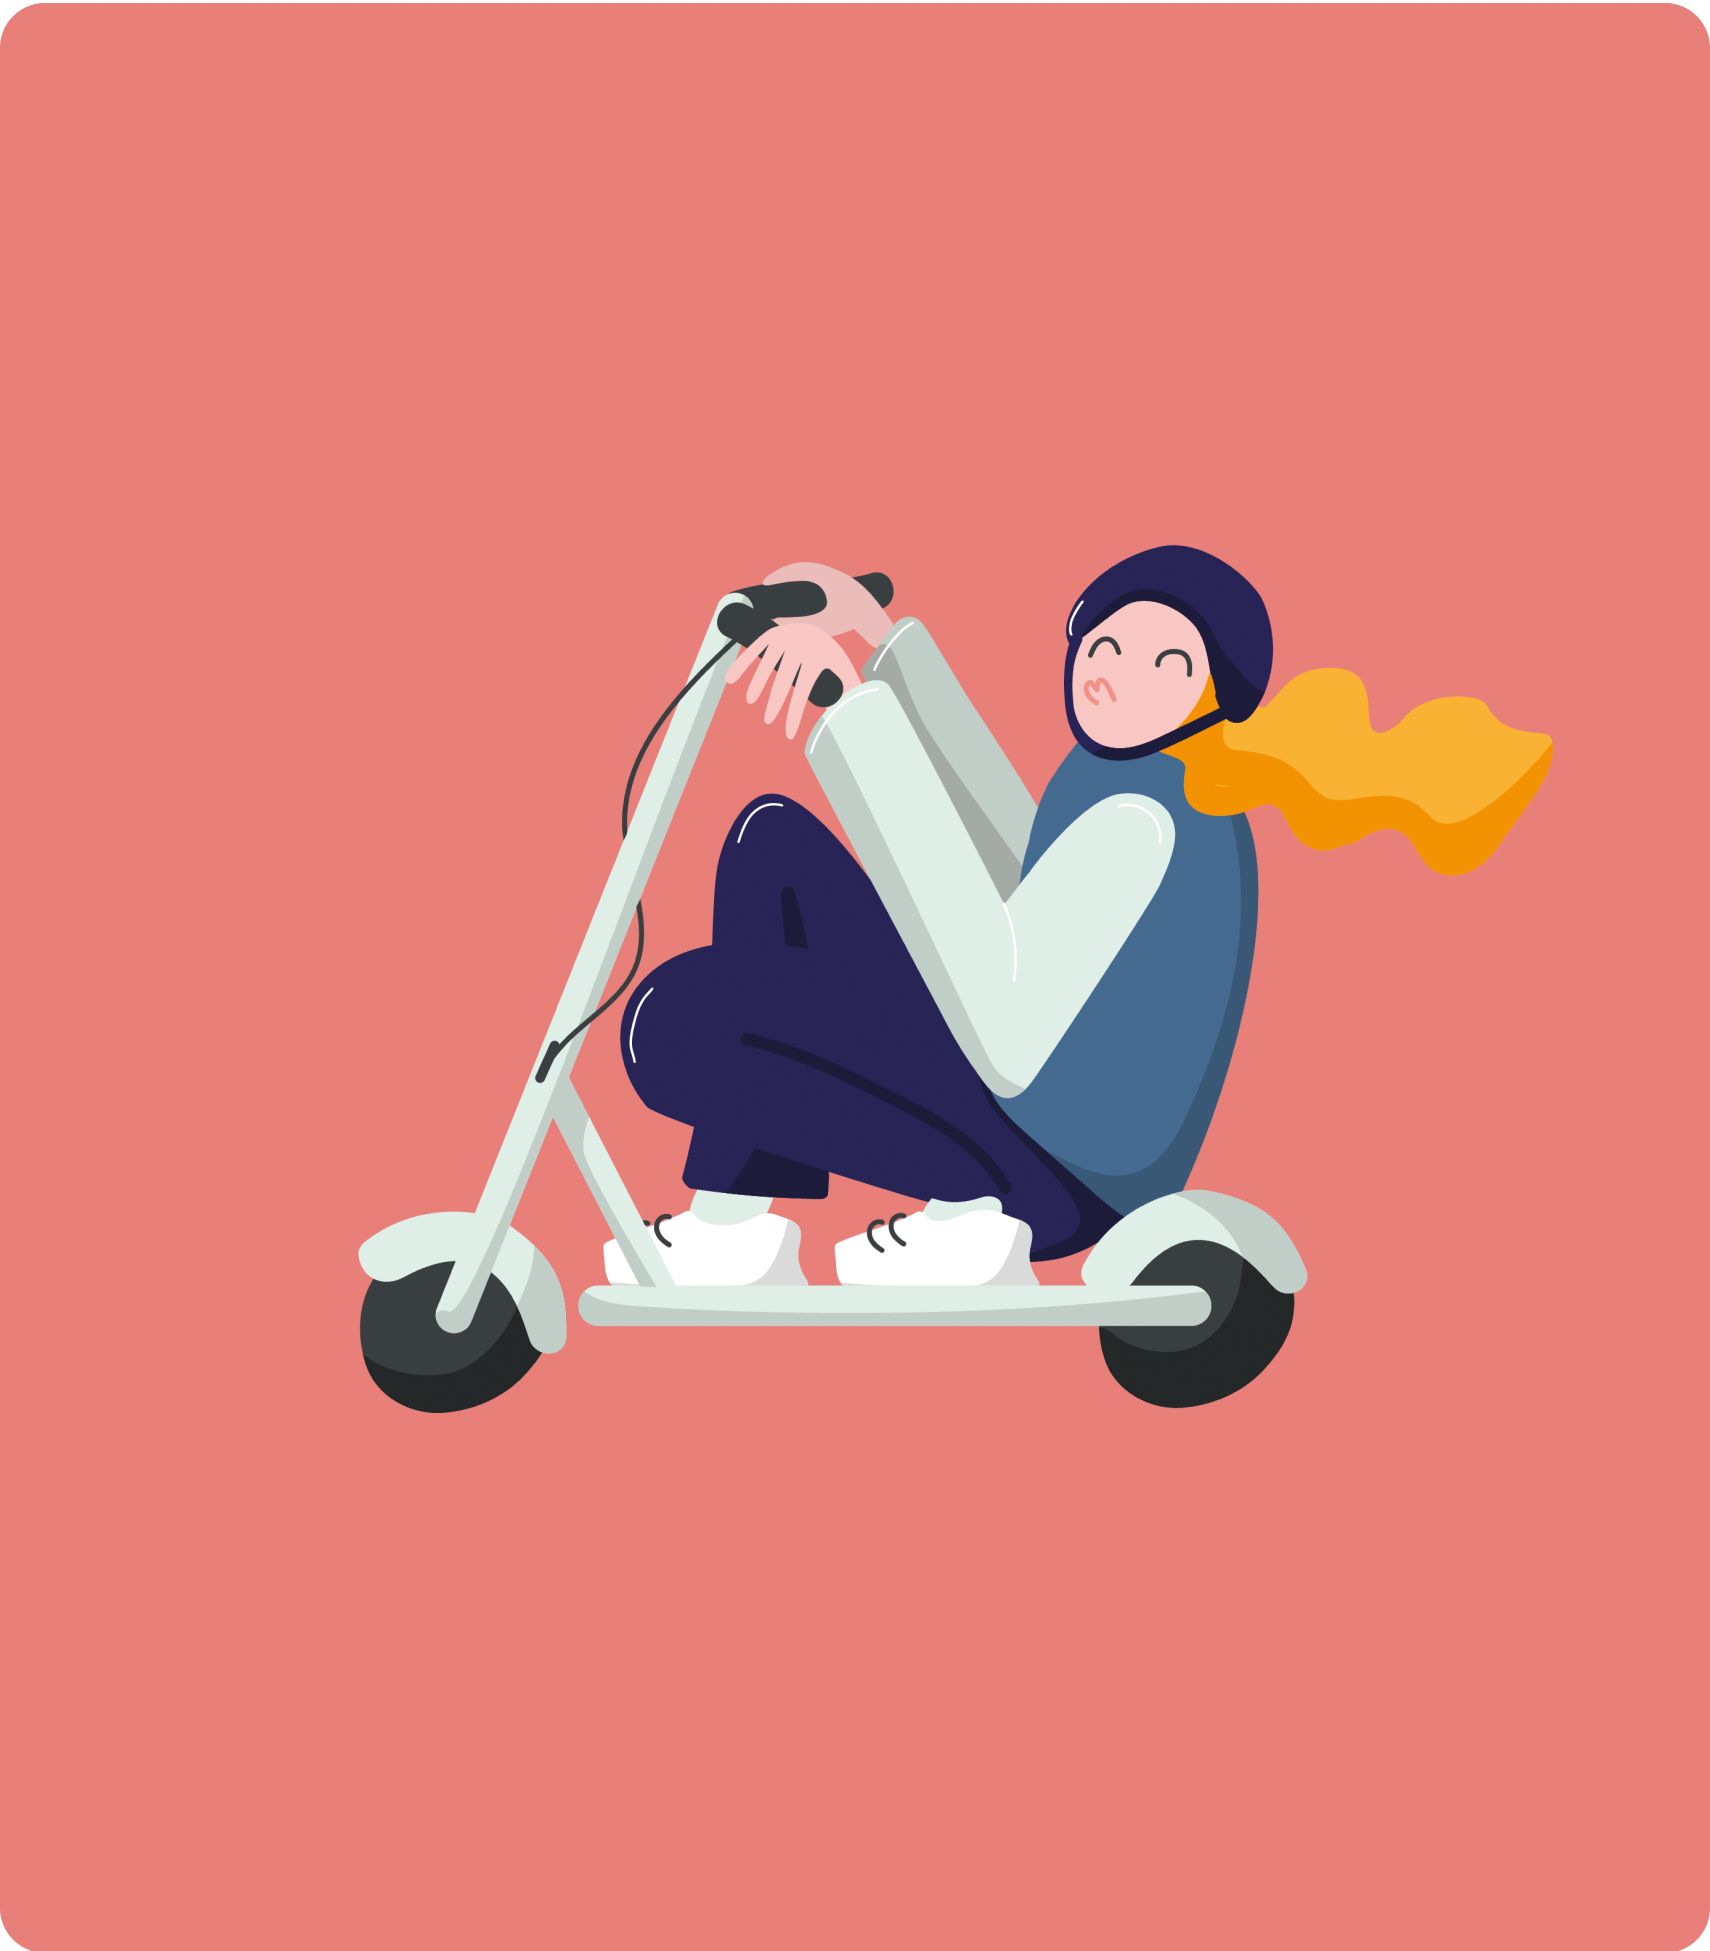 Illustration of a person riding a scooter sitting down.